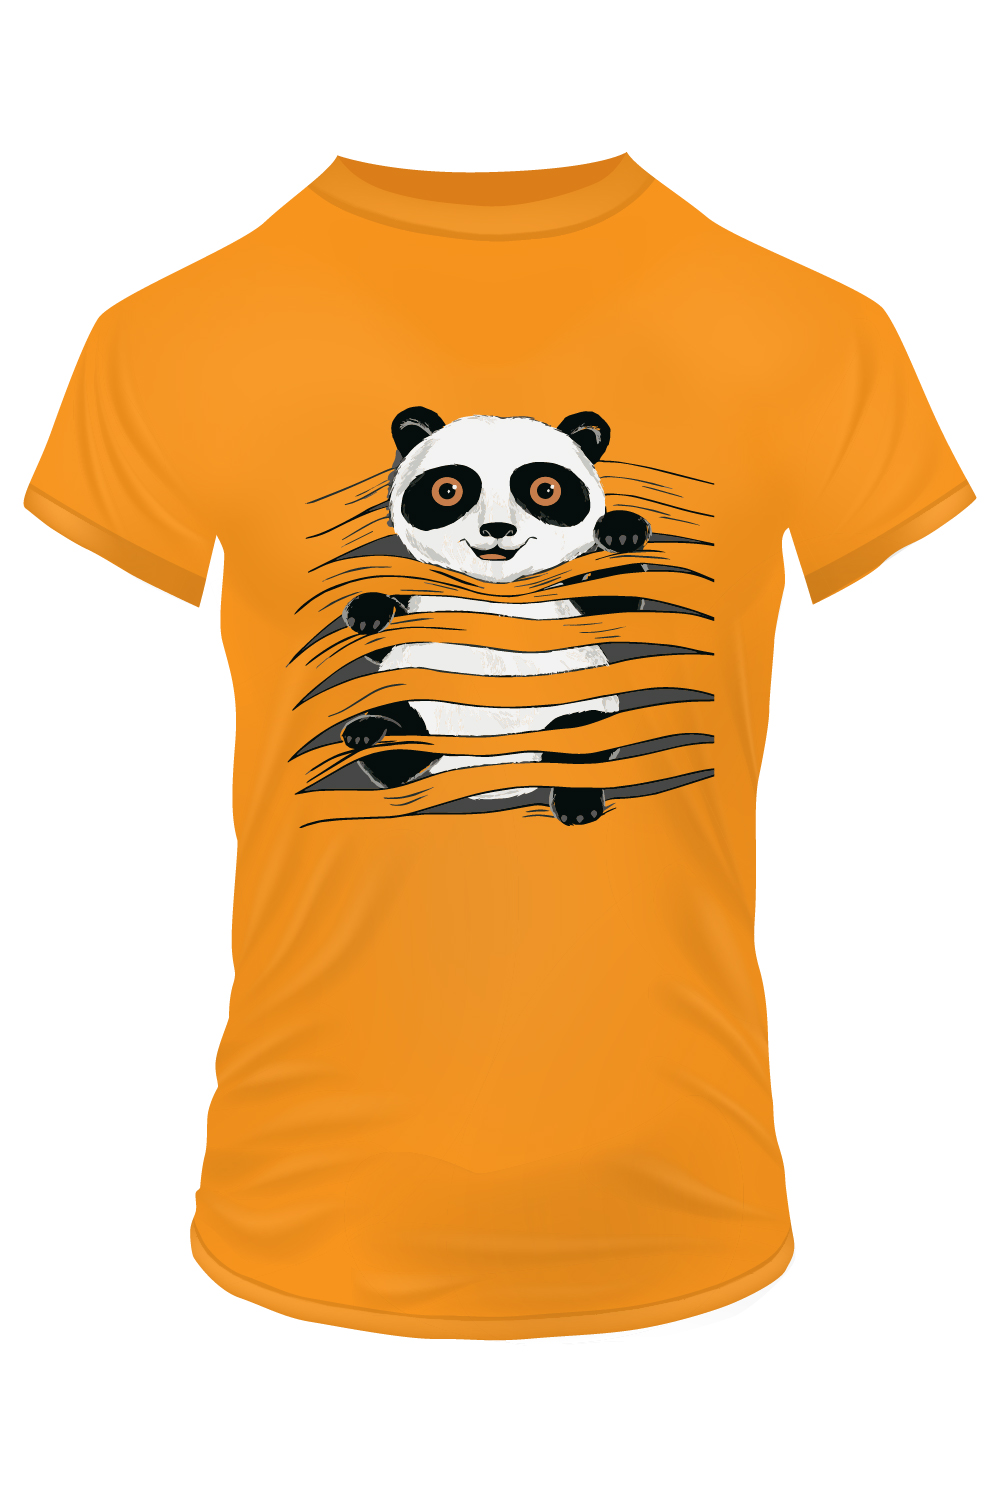 Cute Funny Panda Coming Out from a torn cloth Vector illustration T-shirt design pinterest preview image.